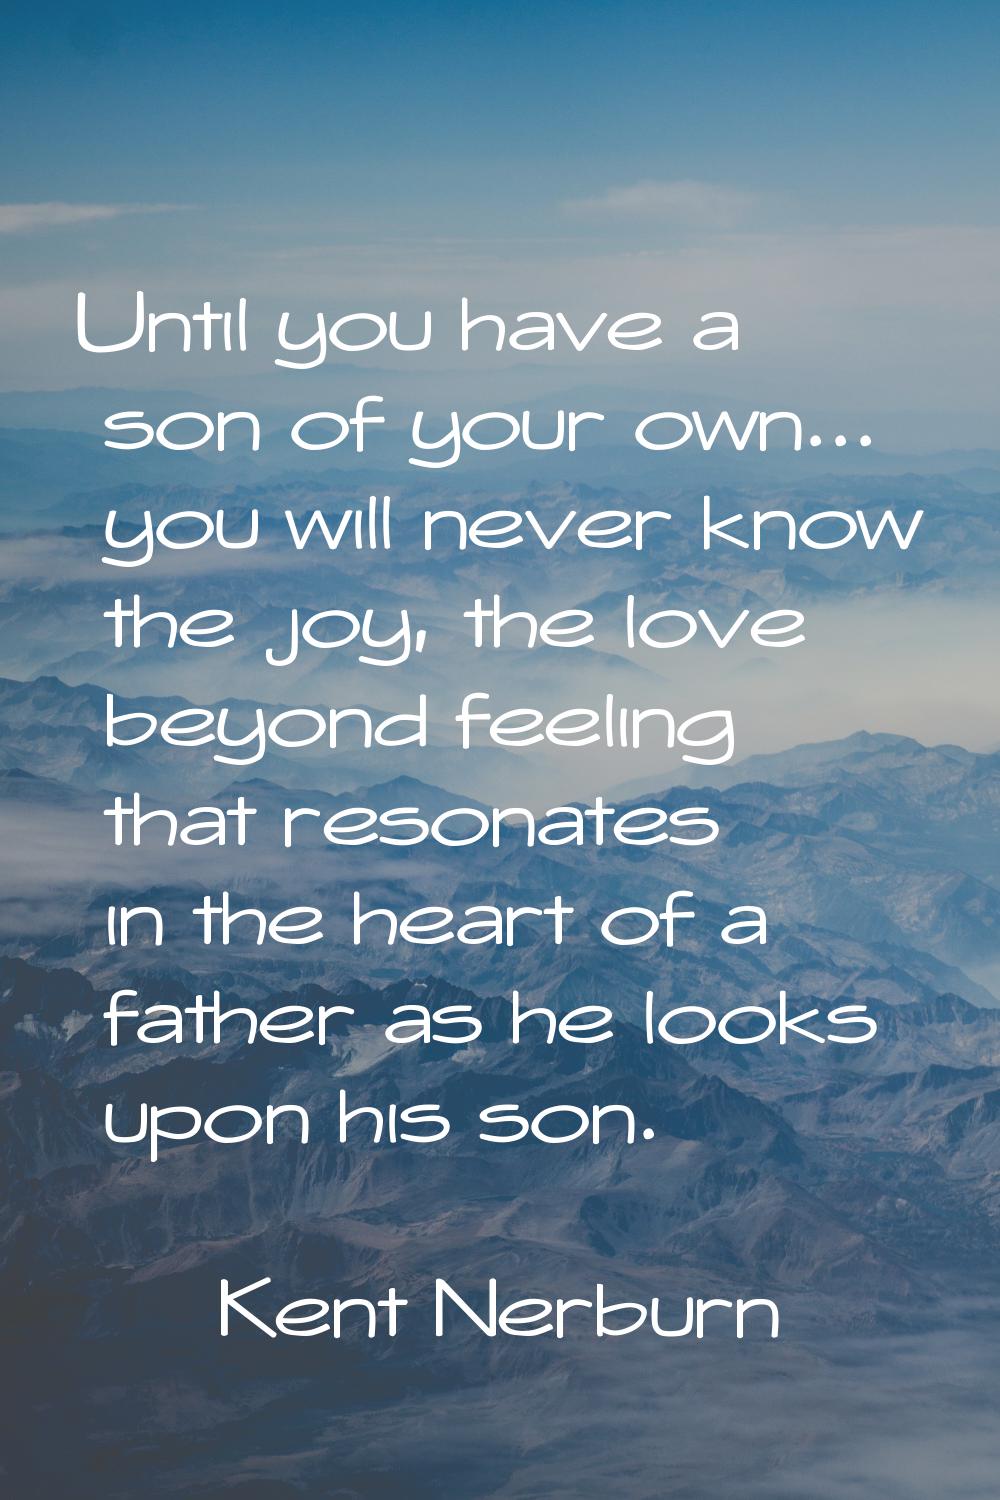 Until you have a son of your own... you will never know the joy, the love beyond feeling that reson